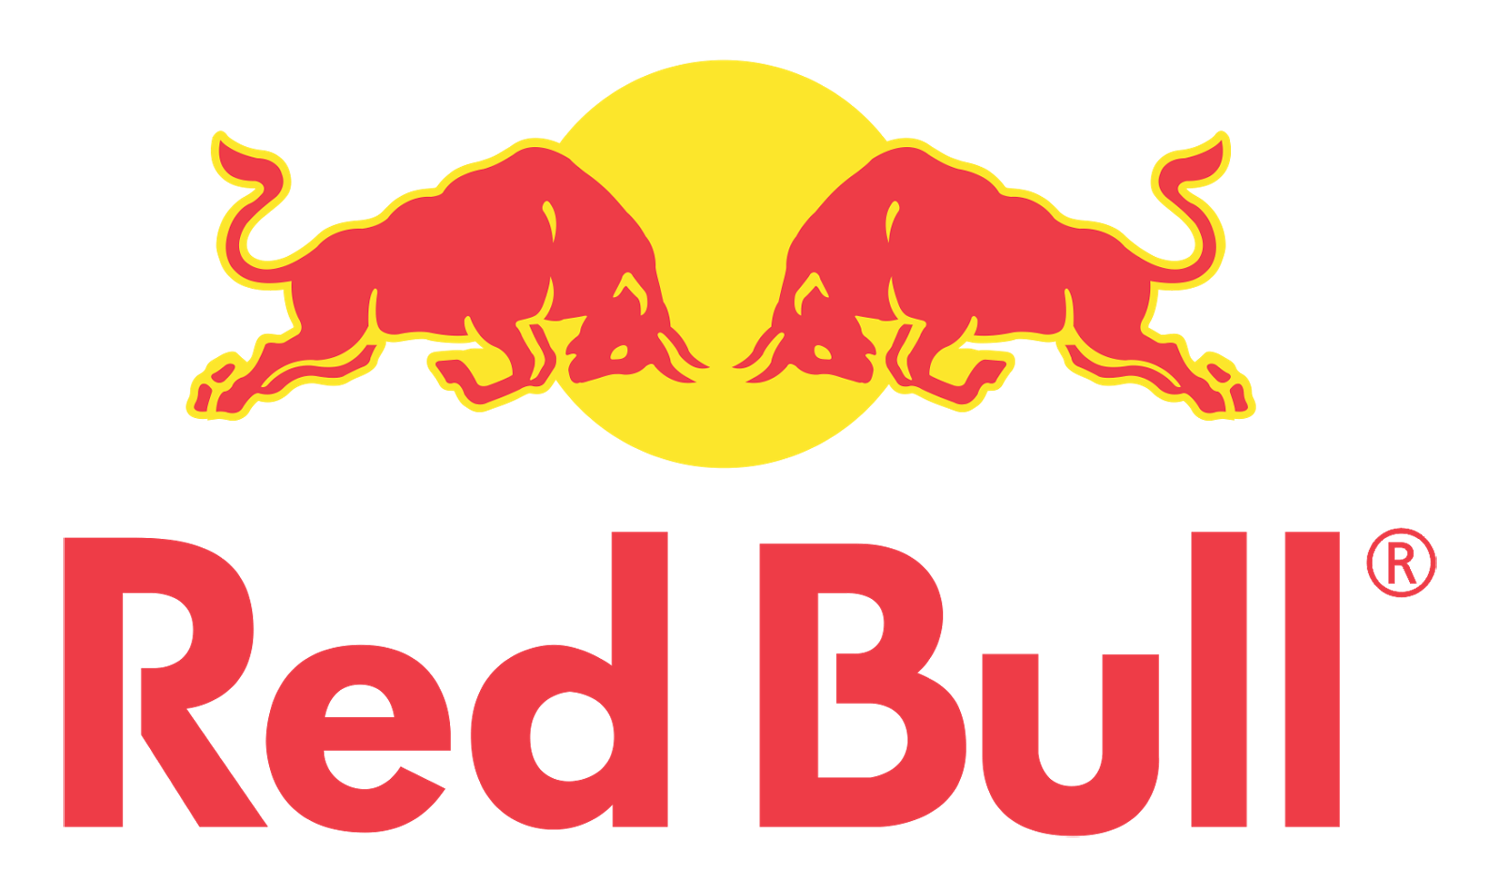 Red World Logo - Red Bull Logo, Red Bull Symbol, Meaning, History and Evolution